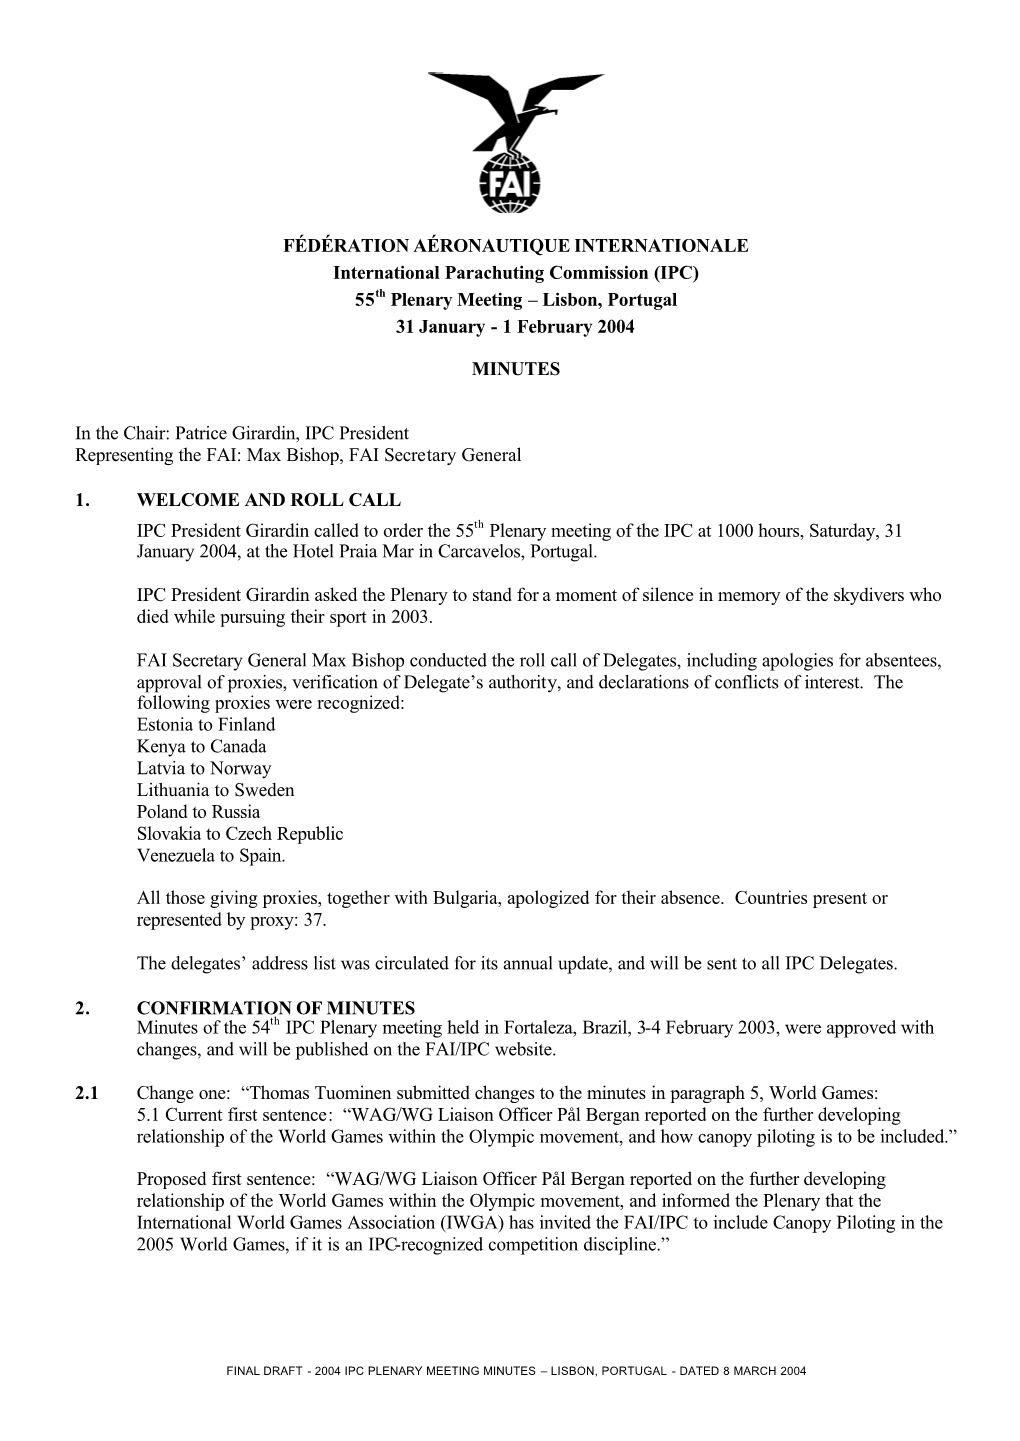 Minutes of the 2004 IPC Meeting